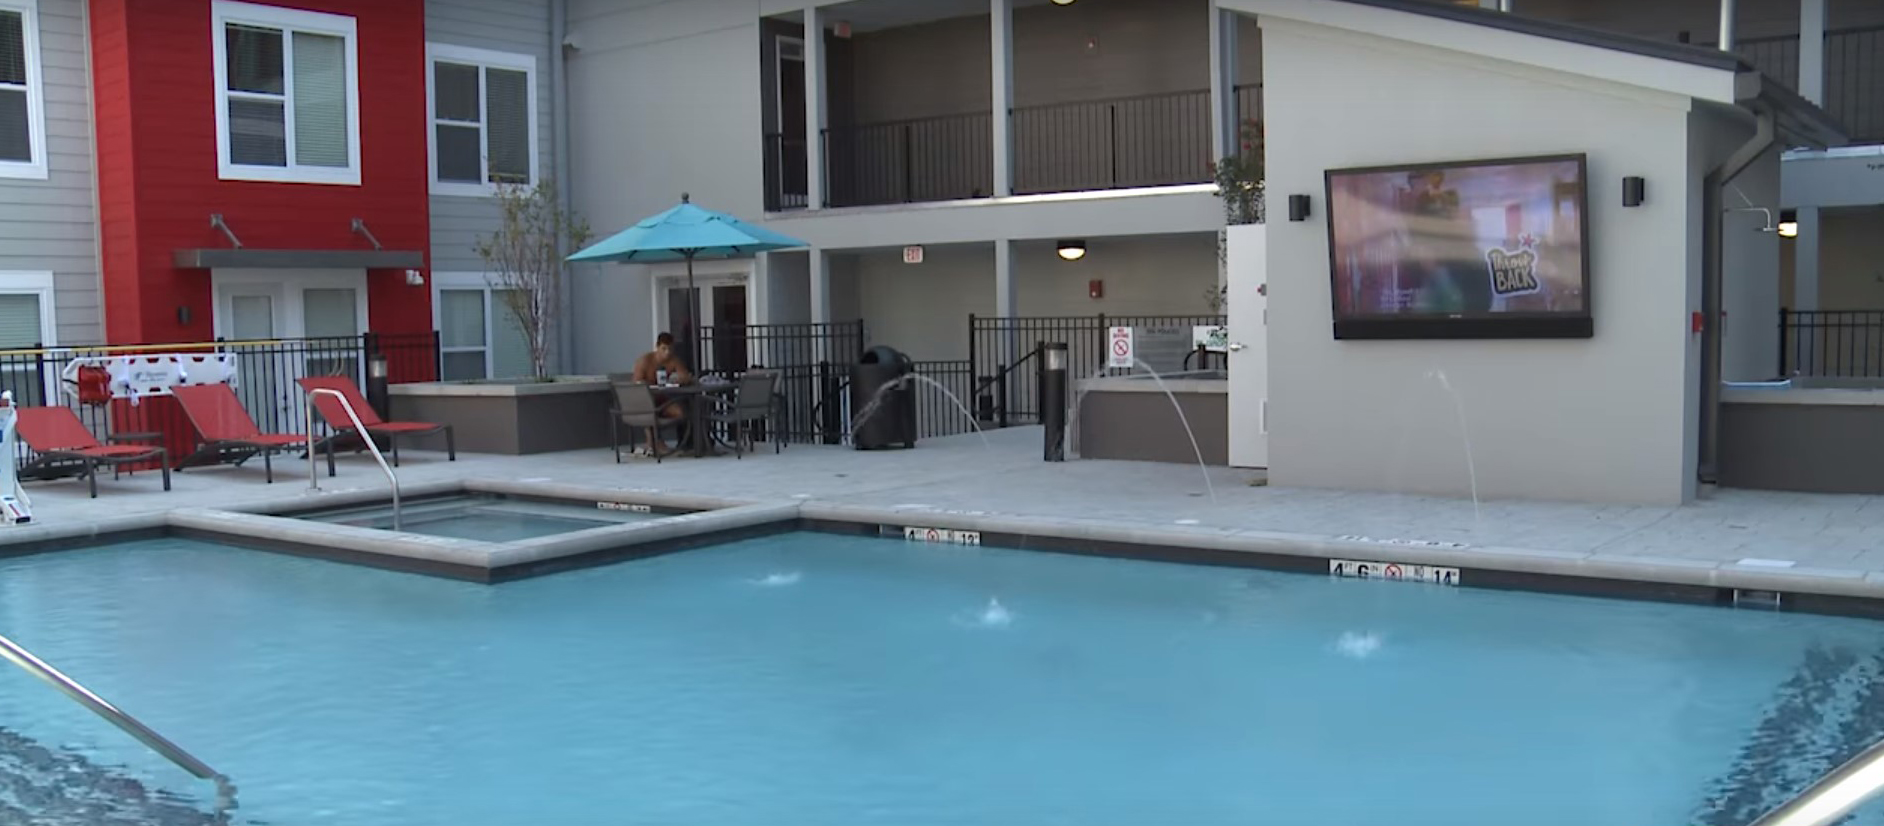 Stainless steel appliances, individual bathrooms and bedrooms, hot tubs and extensive game rooms are all part of the new student living experience at Louisville’s two newest student apartment complexes.